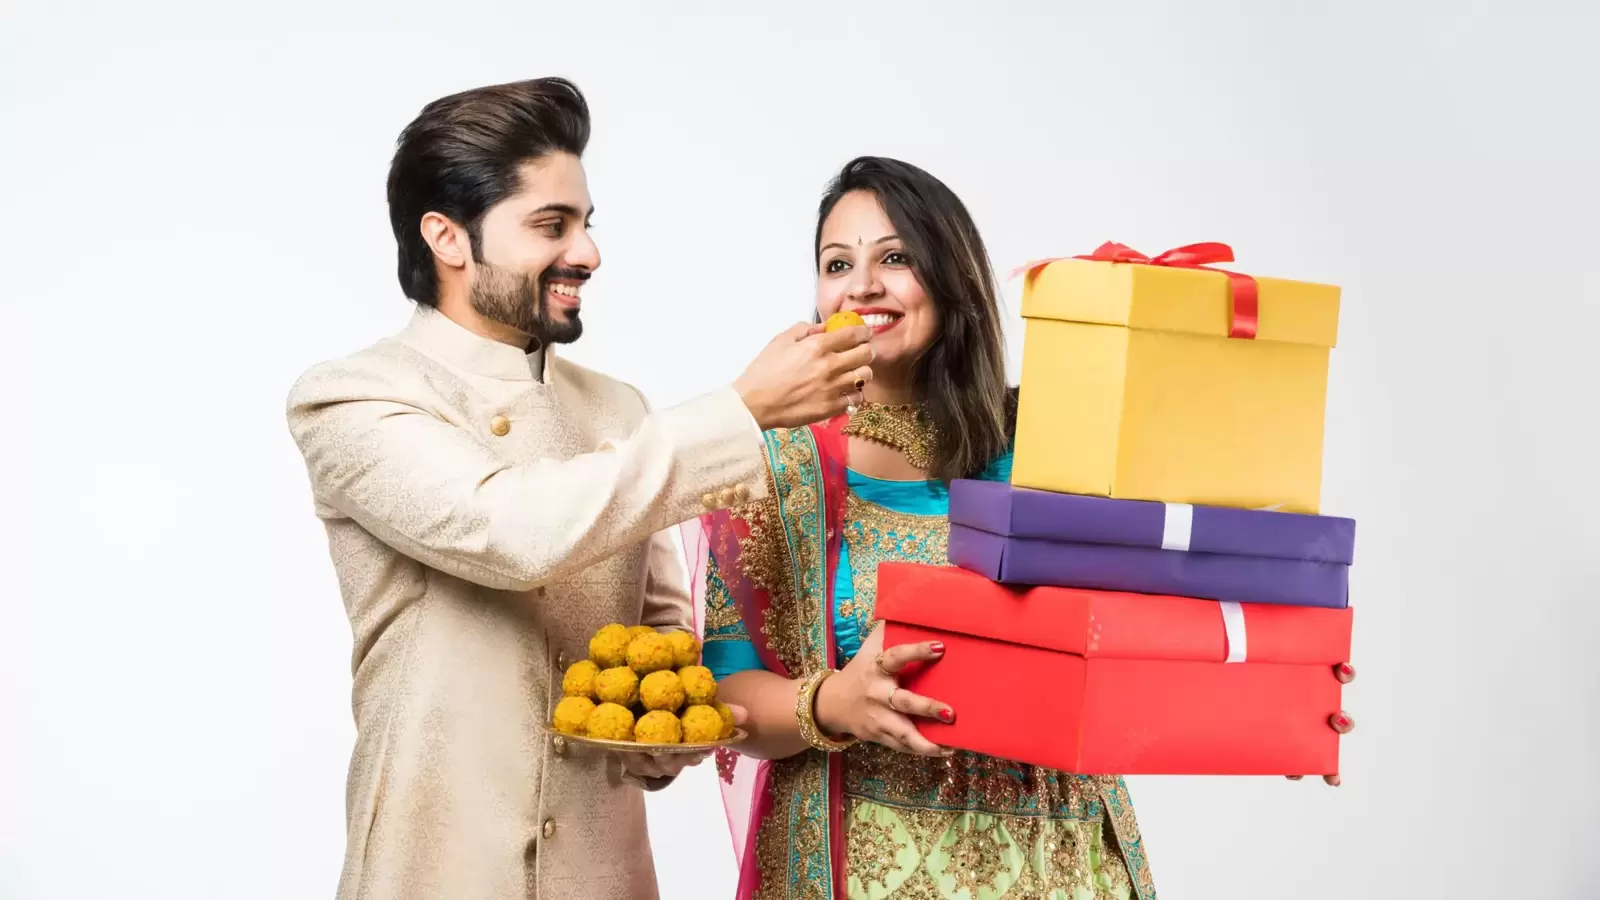 Valentine's Day Gift Ideas for Him - Same Day Delivery in Kerala |  KeralaGifts.in Blog